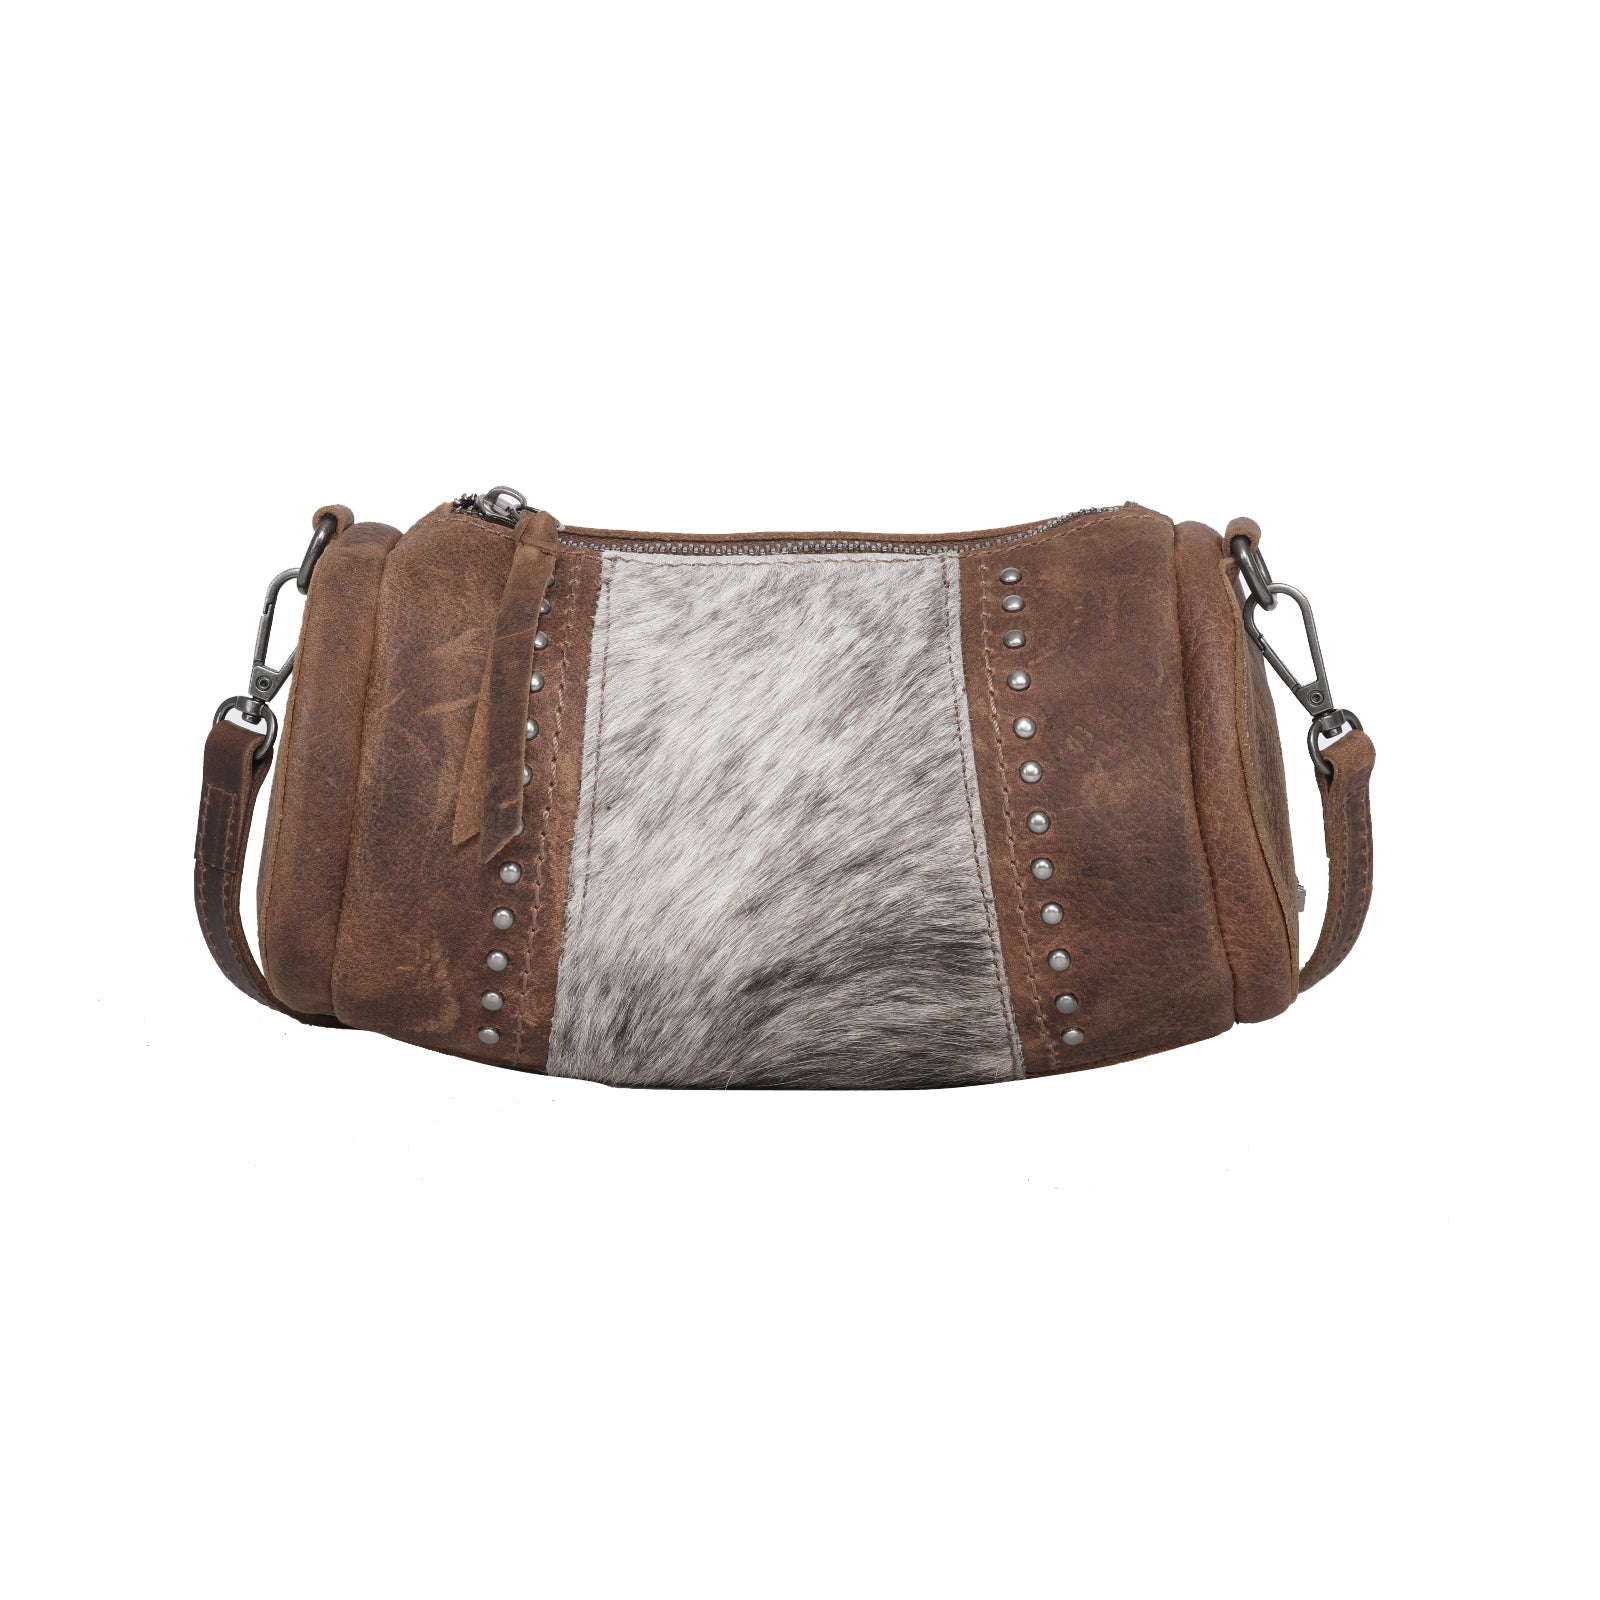 RLC-L156 Montana West Real Leather Cow-Hide Collection Mini Barrel